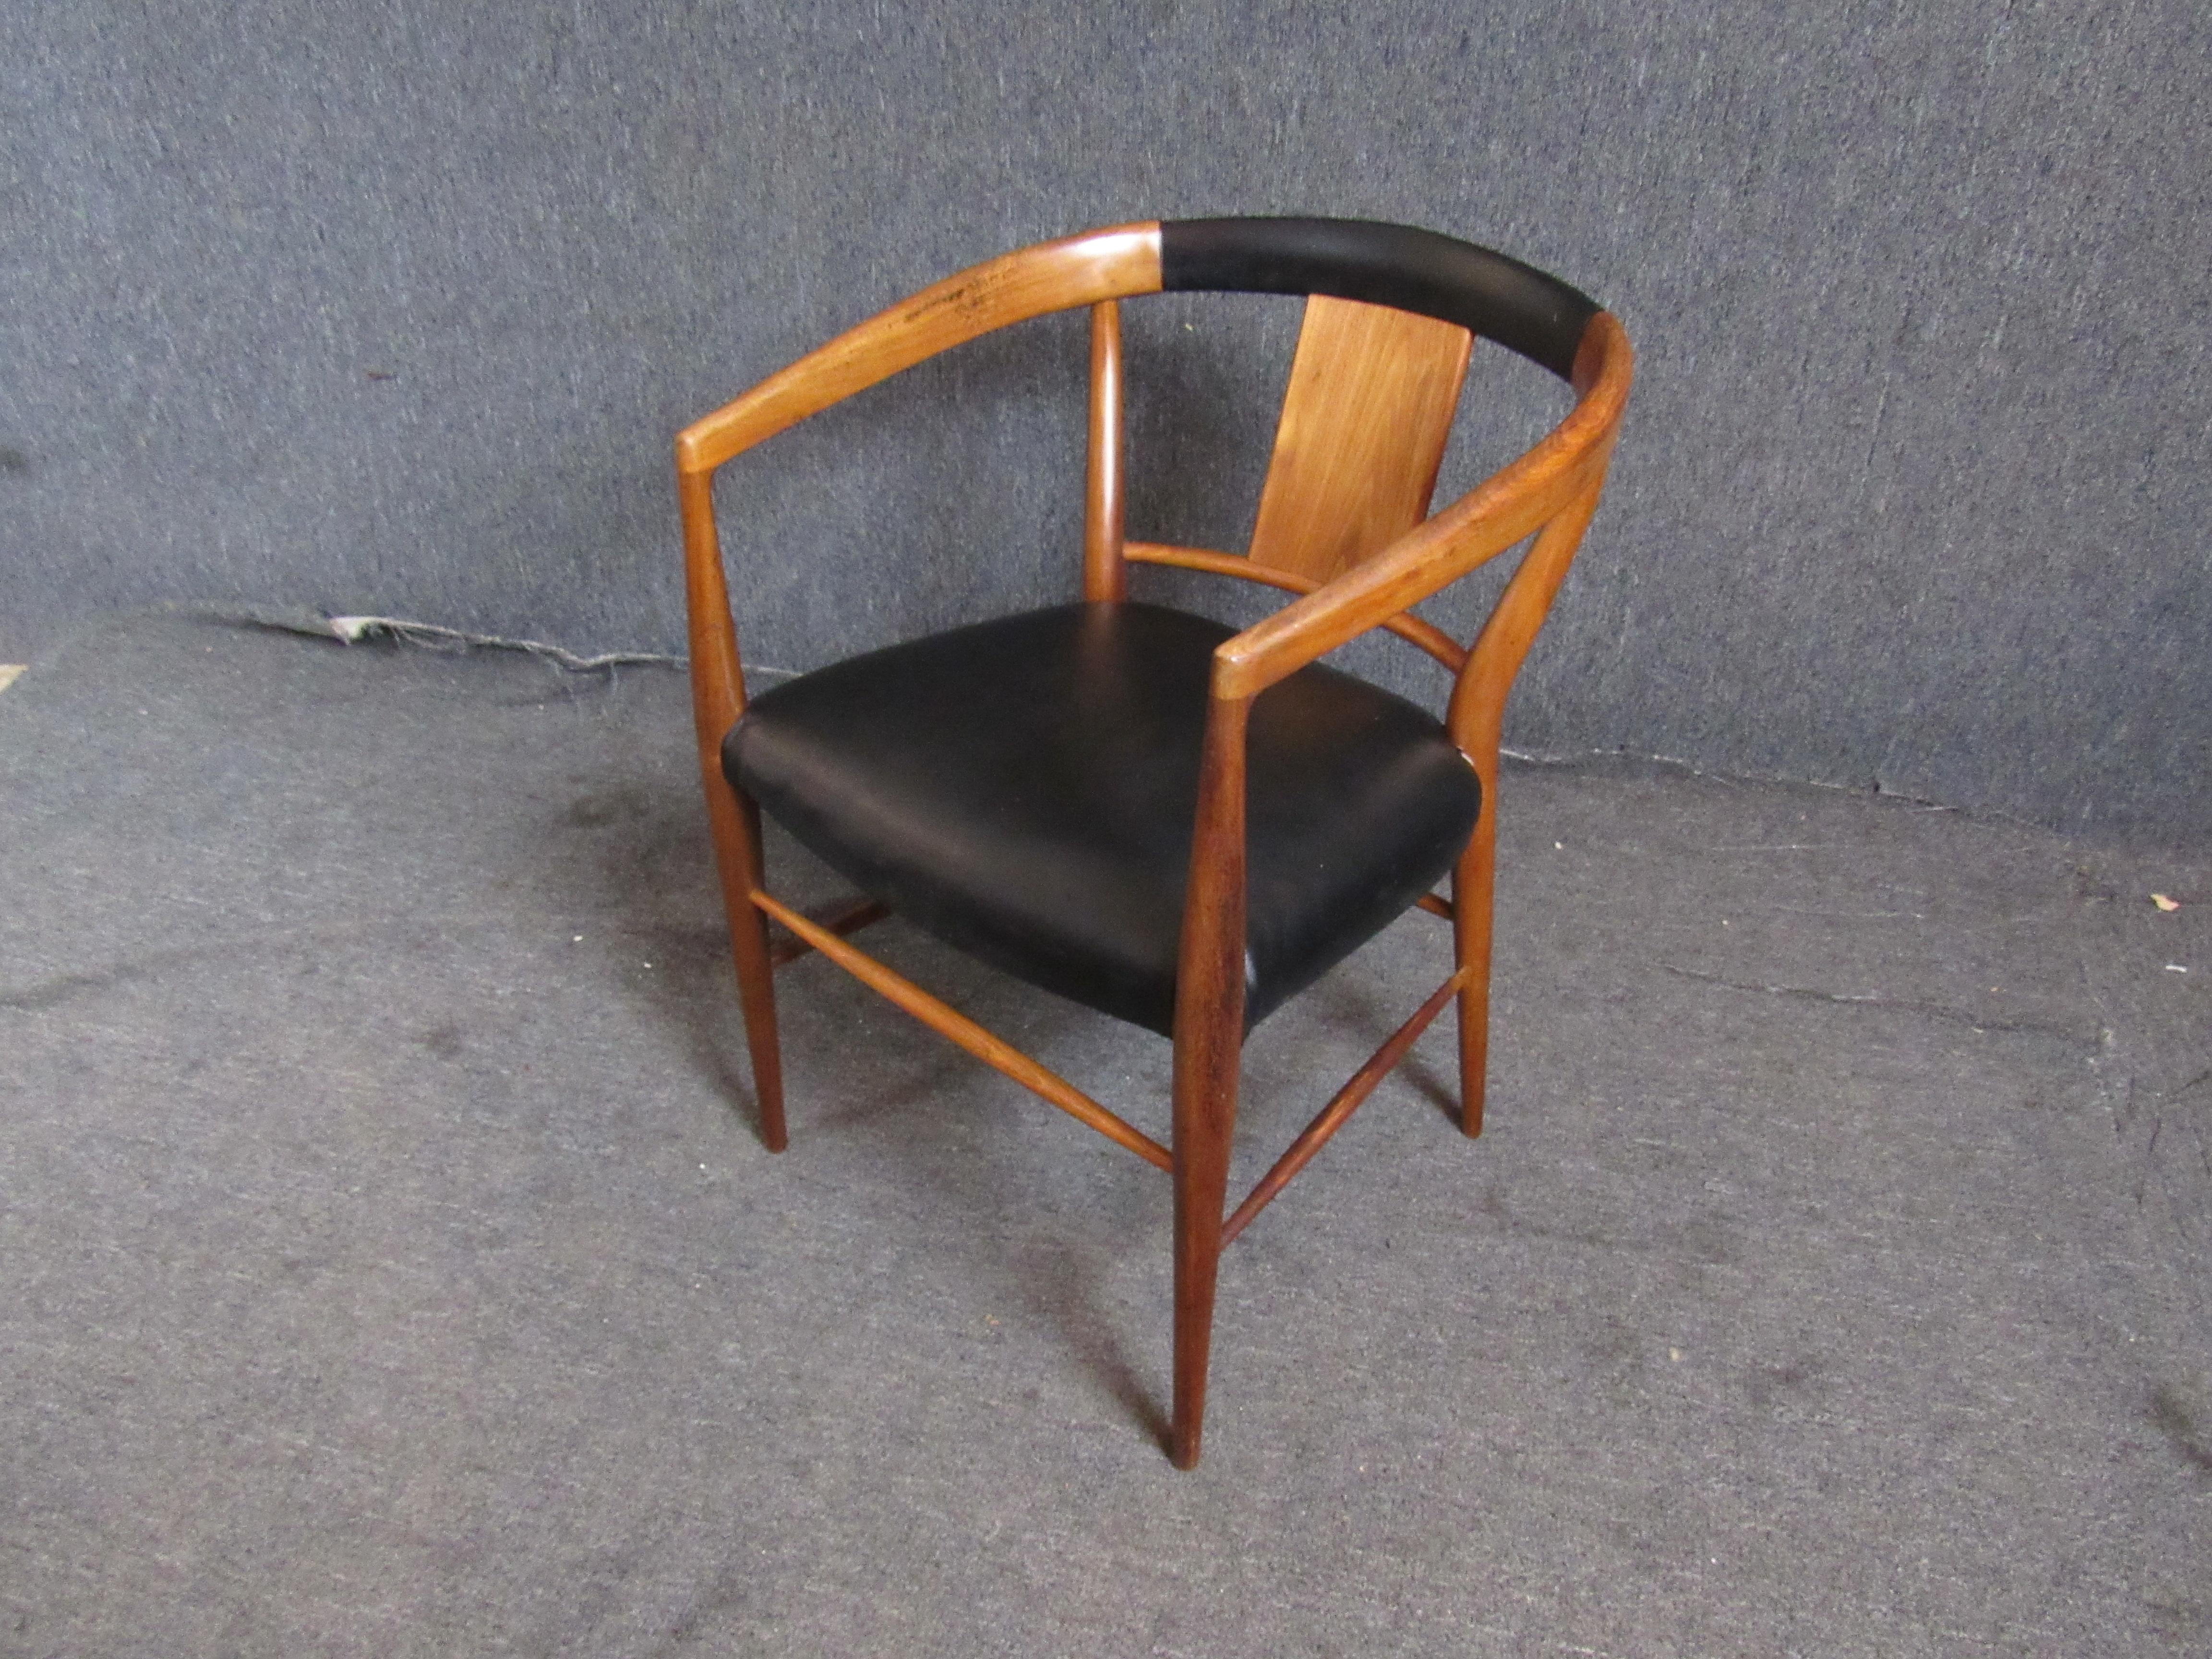 Round back armchair by Henredon for their Cantonesian collection. Great mid-century modern form with sculpted wood frame and black seating.
Please confirm location NY or NJ.